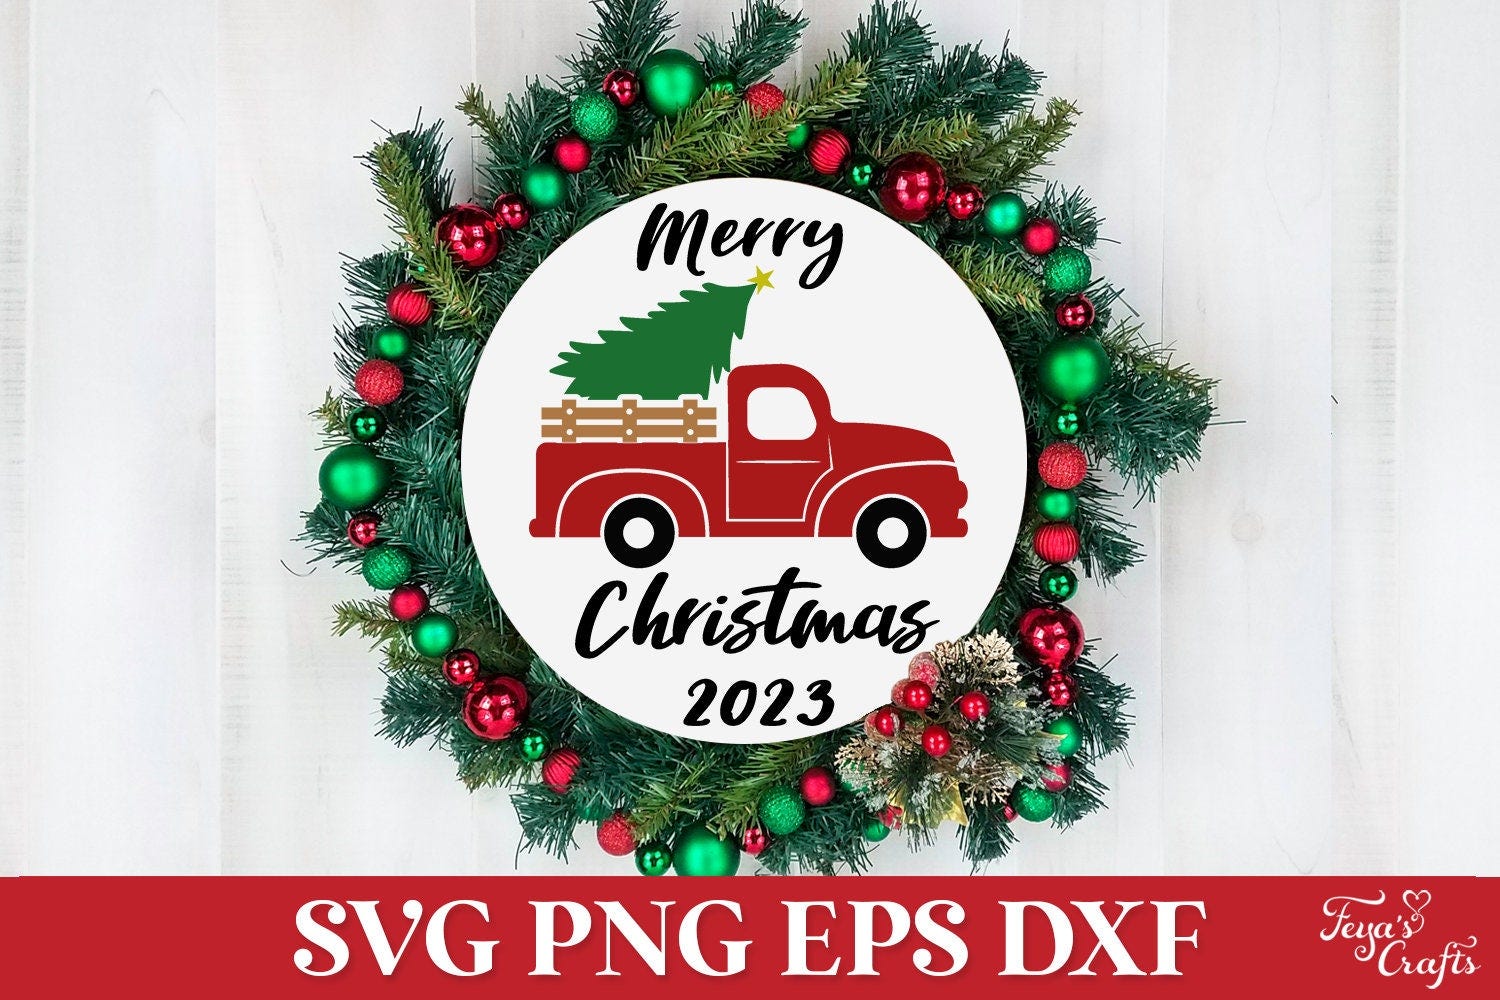 Christmas Red Truck SVG Png, Christmas Farmhouse Truck SVG, Merry Christmas 2023 SVG Png, Retro Christmas Red Truck Svg, Christmas Tree Svg